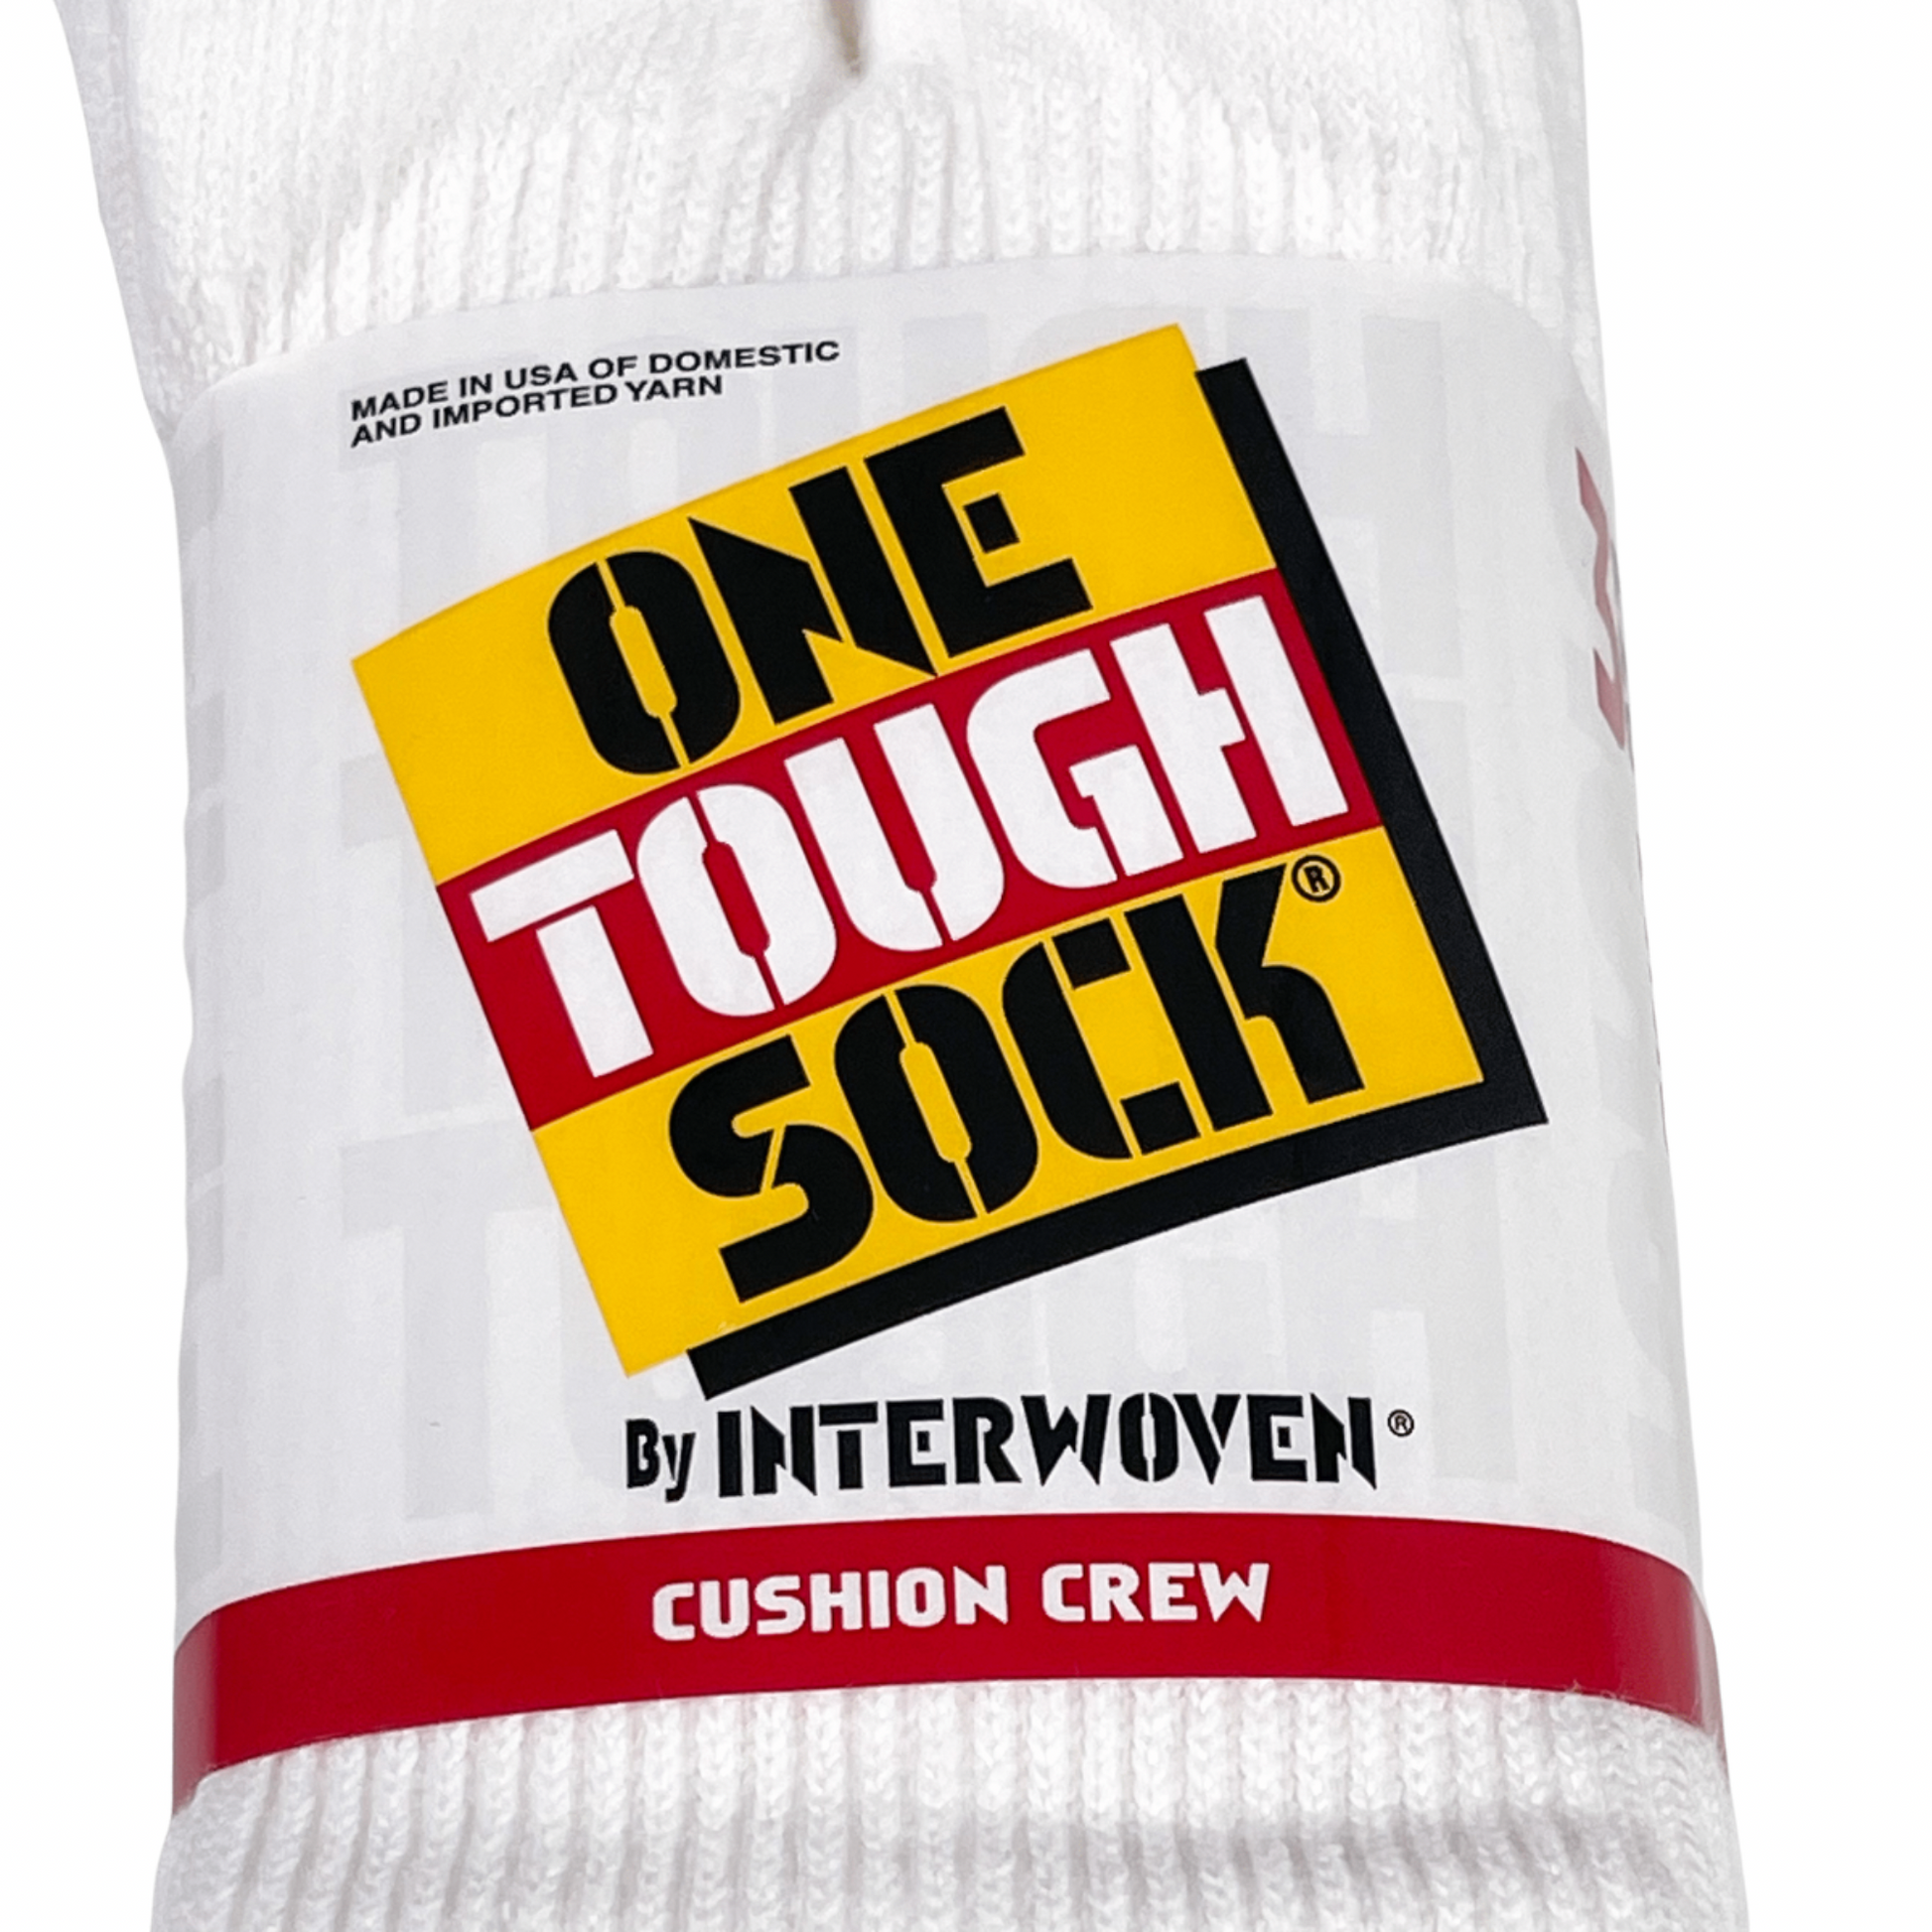 Close up on Front Product Label: INTERWOVEN "ONE TOUGH SOCK" CASUAL COTTON CUSHION CREW - White